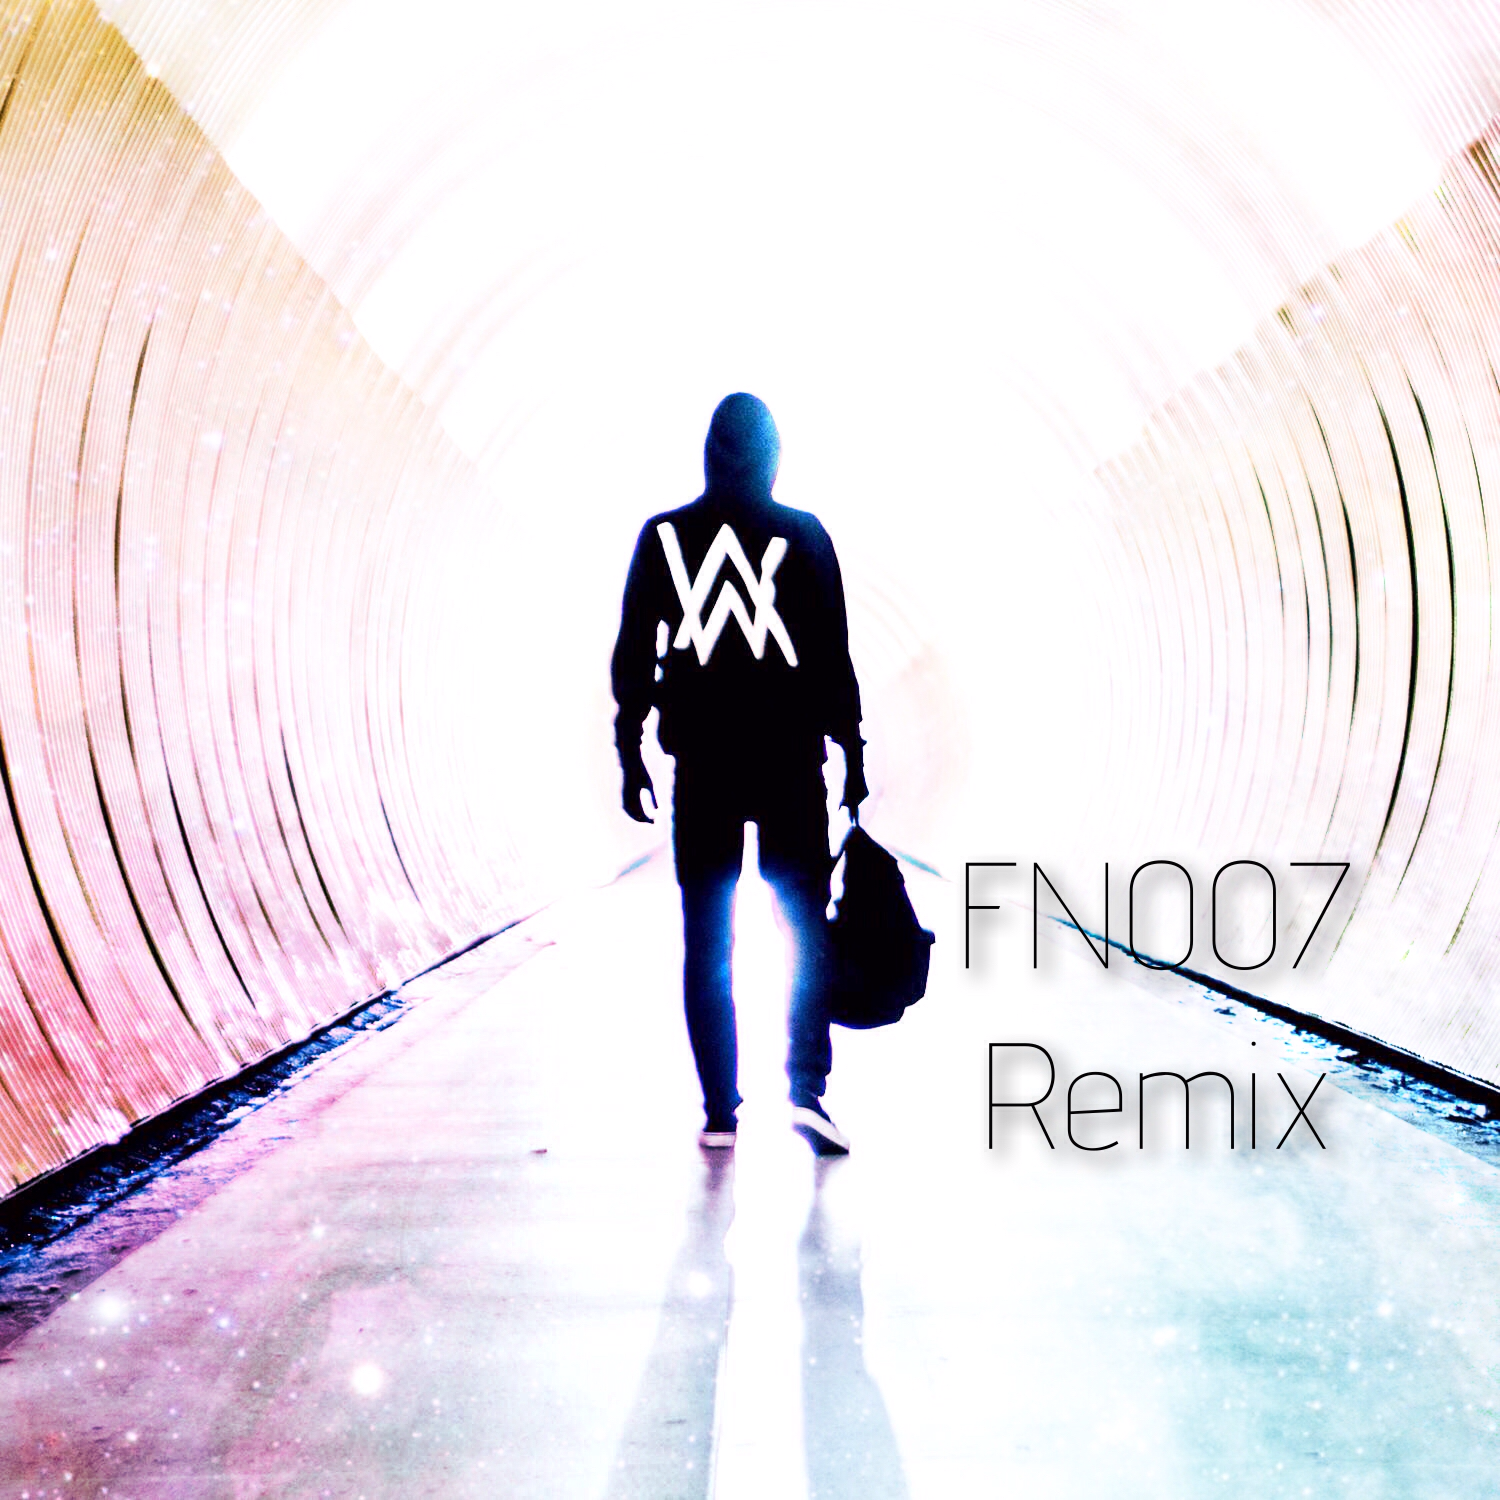 Faded (FN007 Remix)